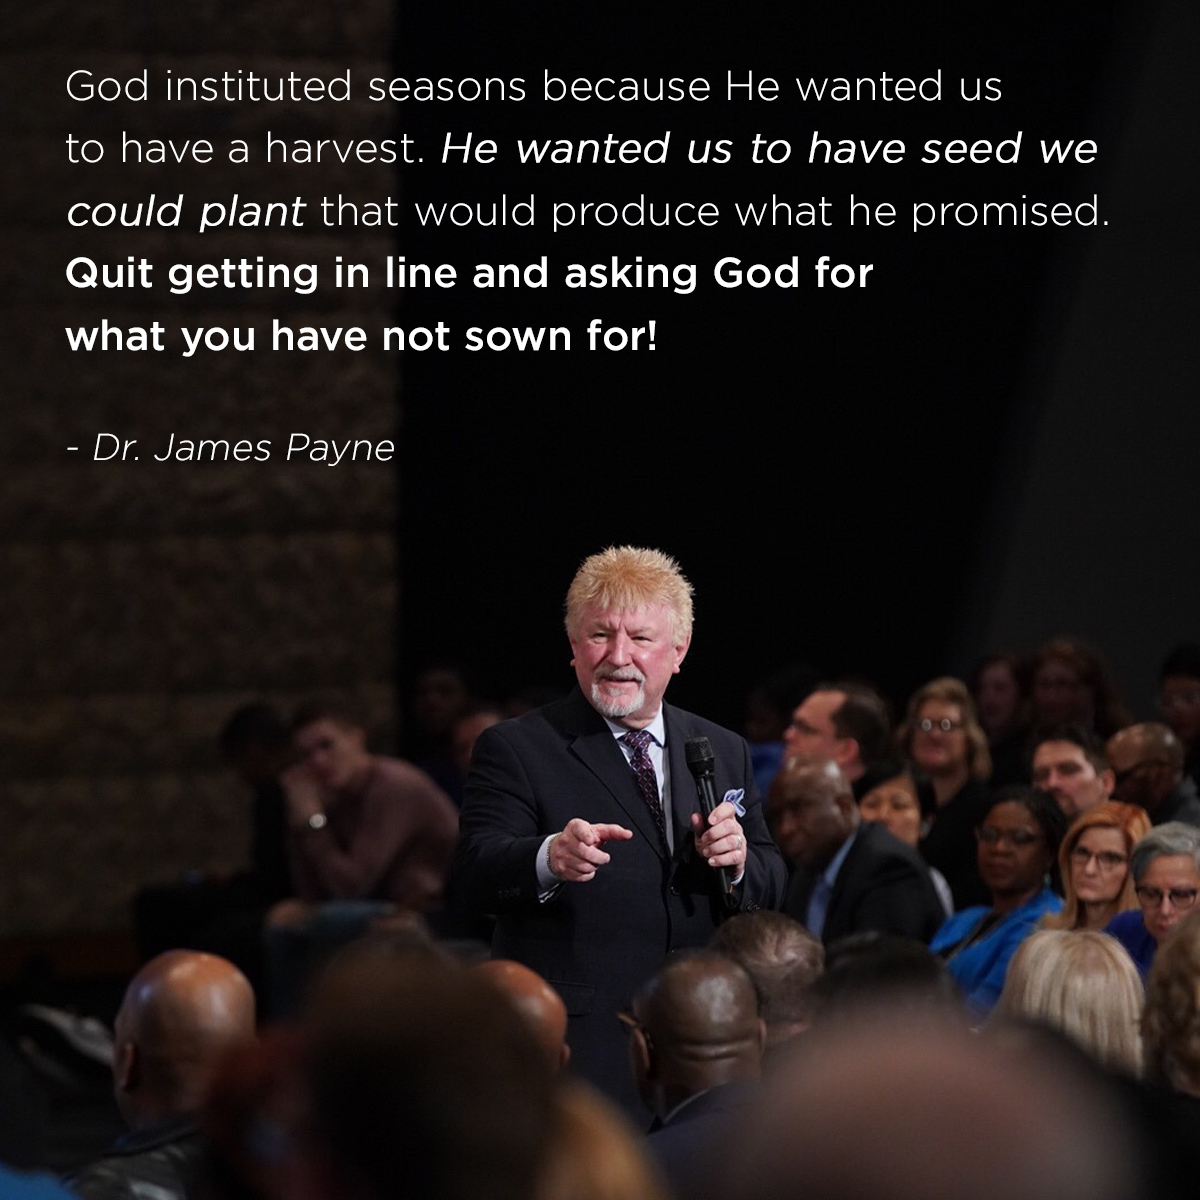 “God instituted seasons because He wanted us to have a harvest. He wanted us to have seed we could plant that would produce what he promised. Quit getting in line and asking God for what you have not sown for!” – Dr. James Payne